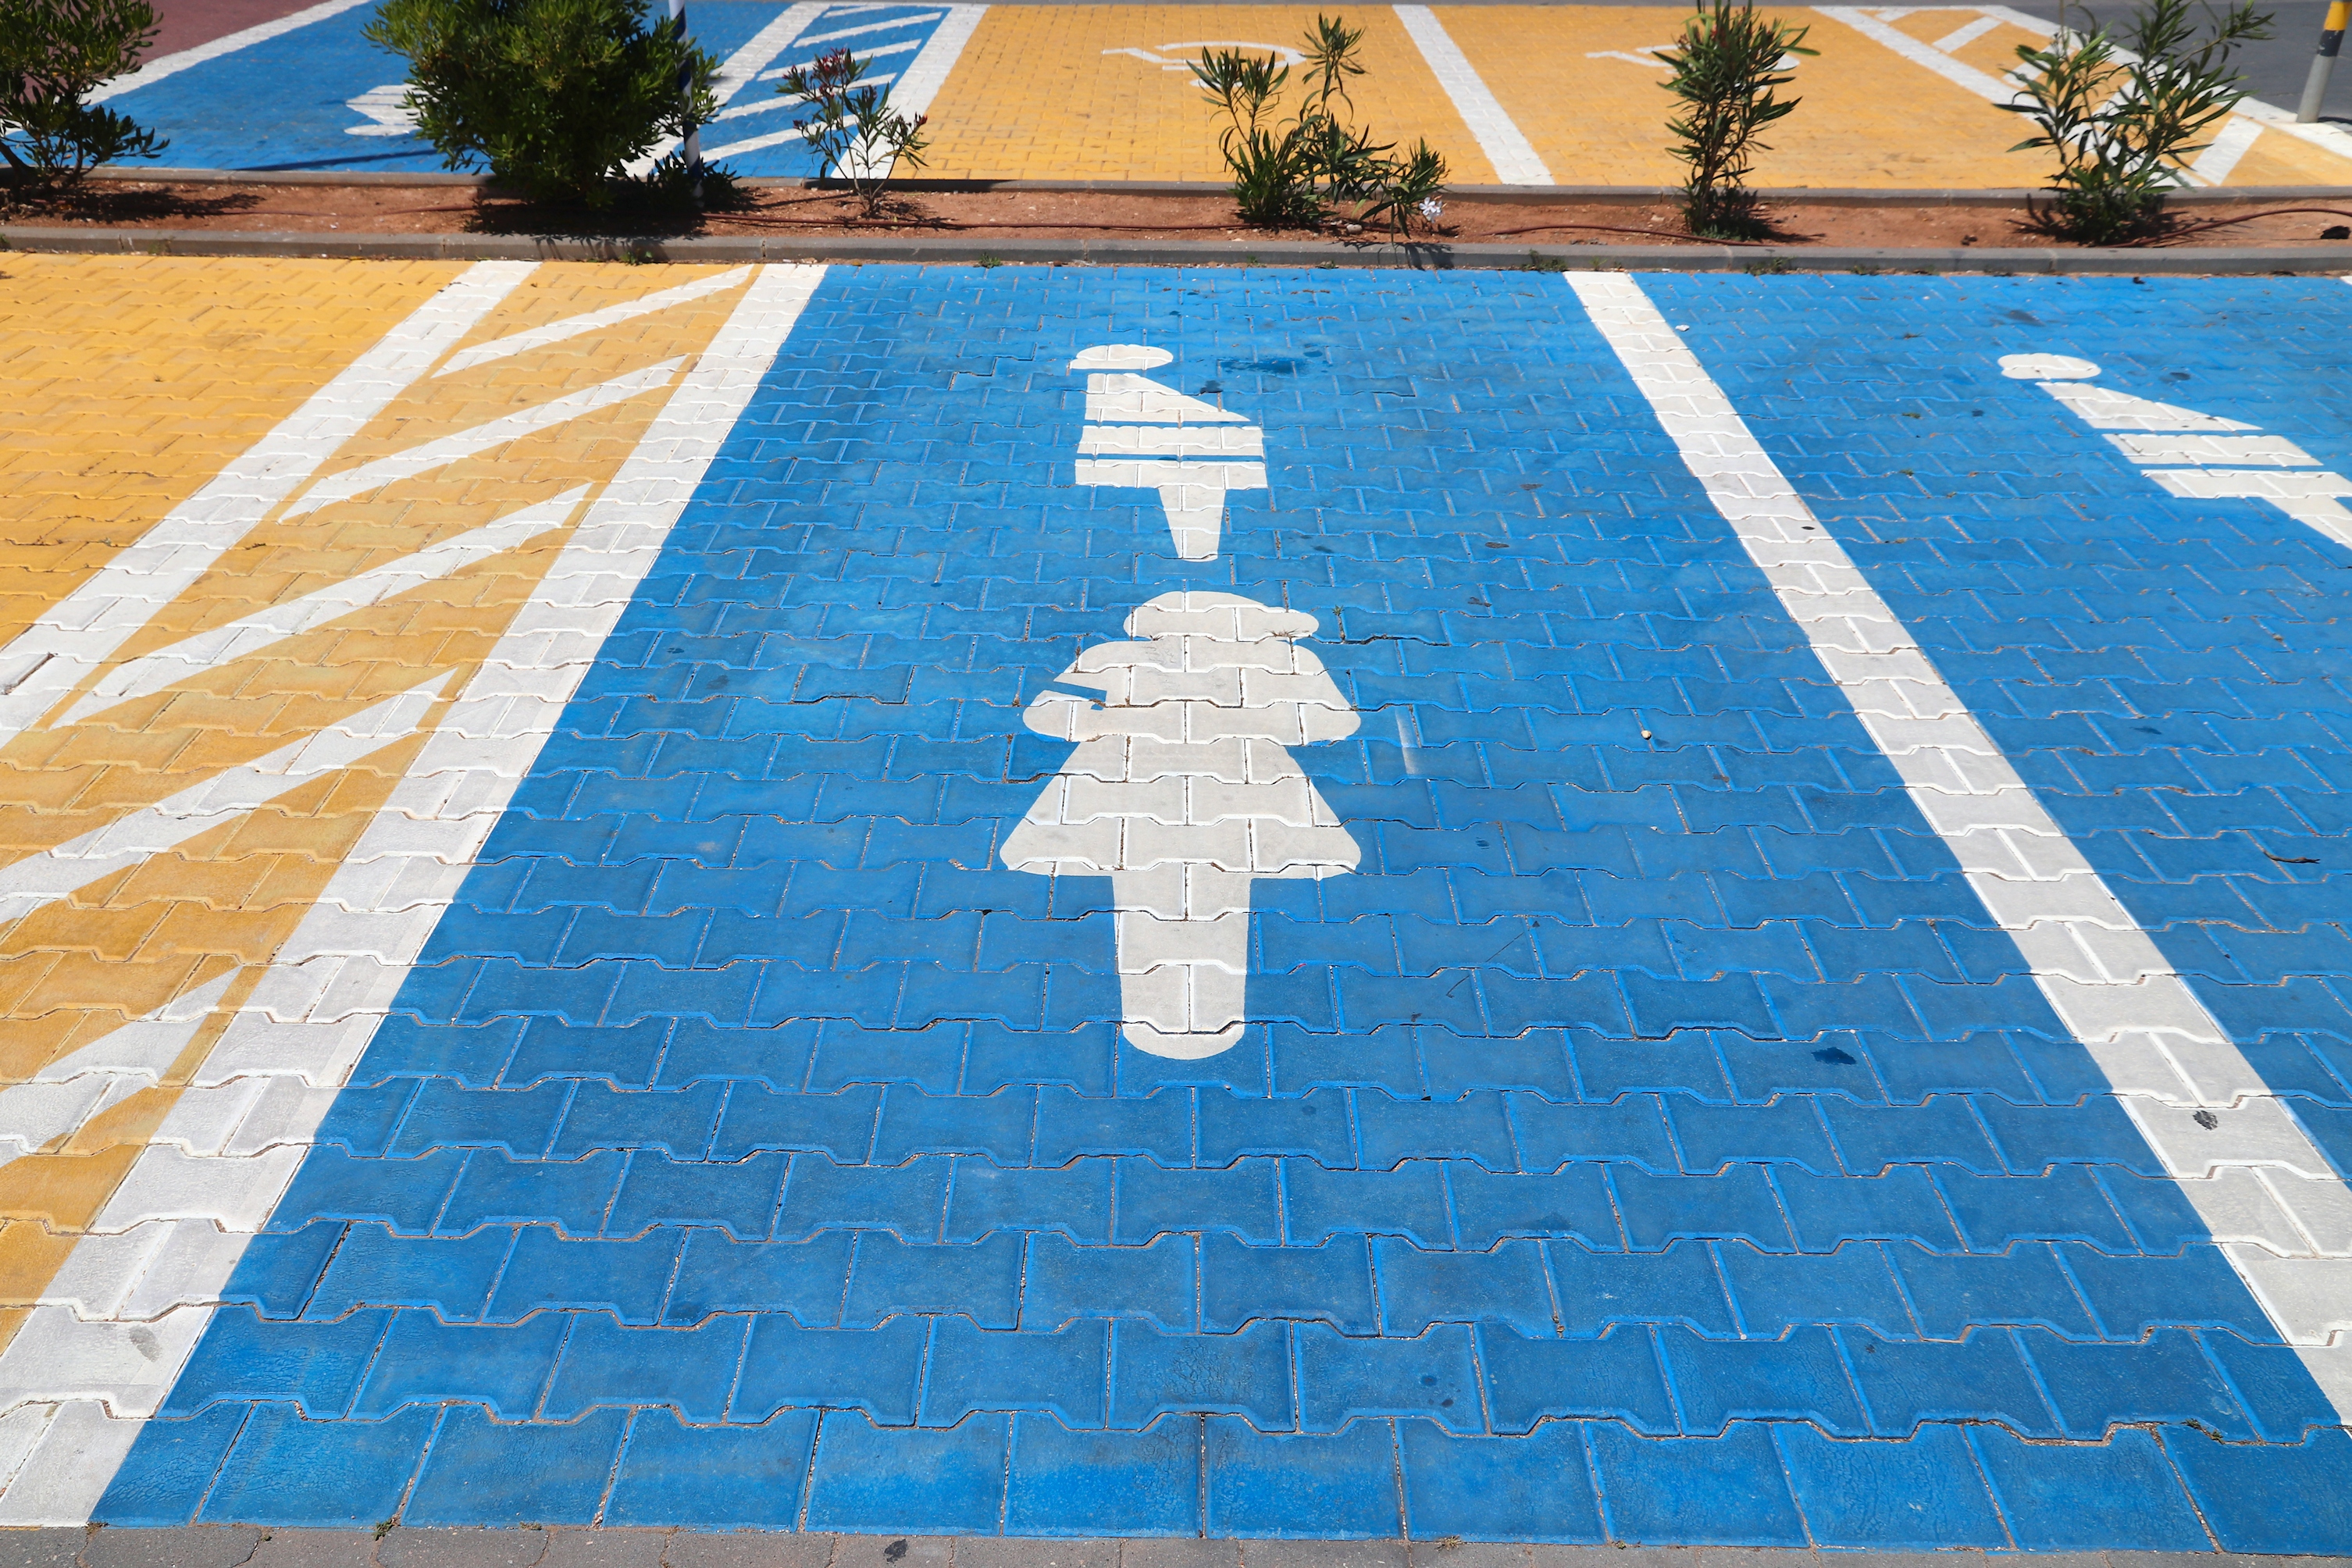 parking spot for mothers with children and expecting mothers in Portugal